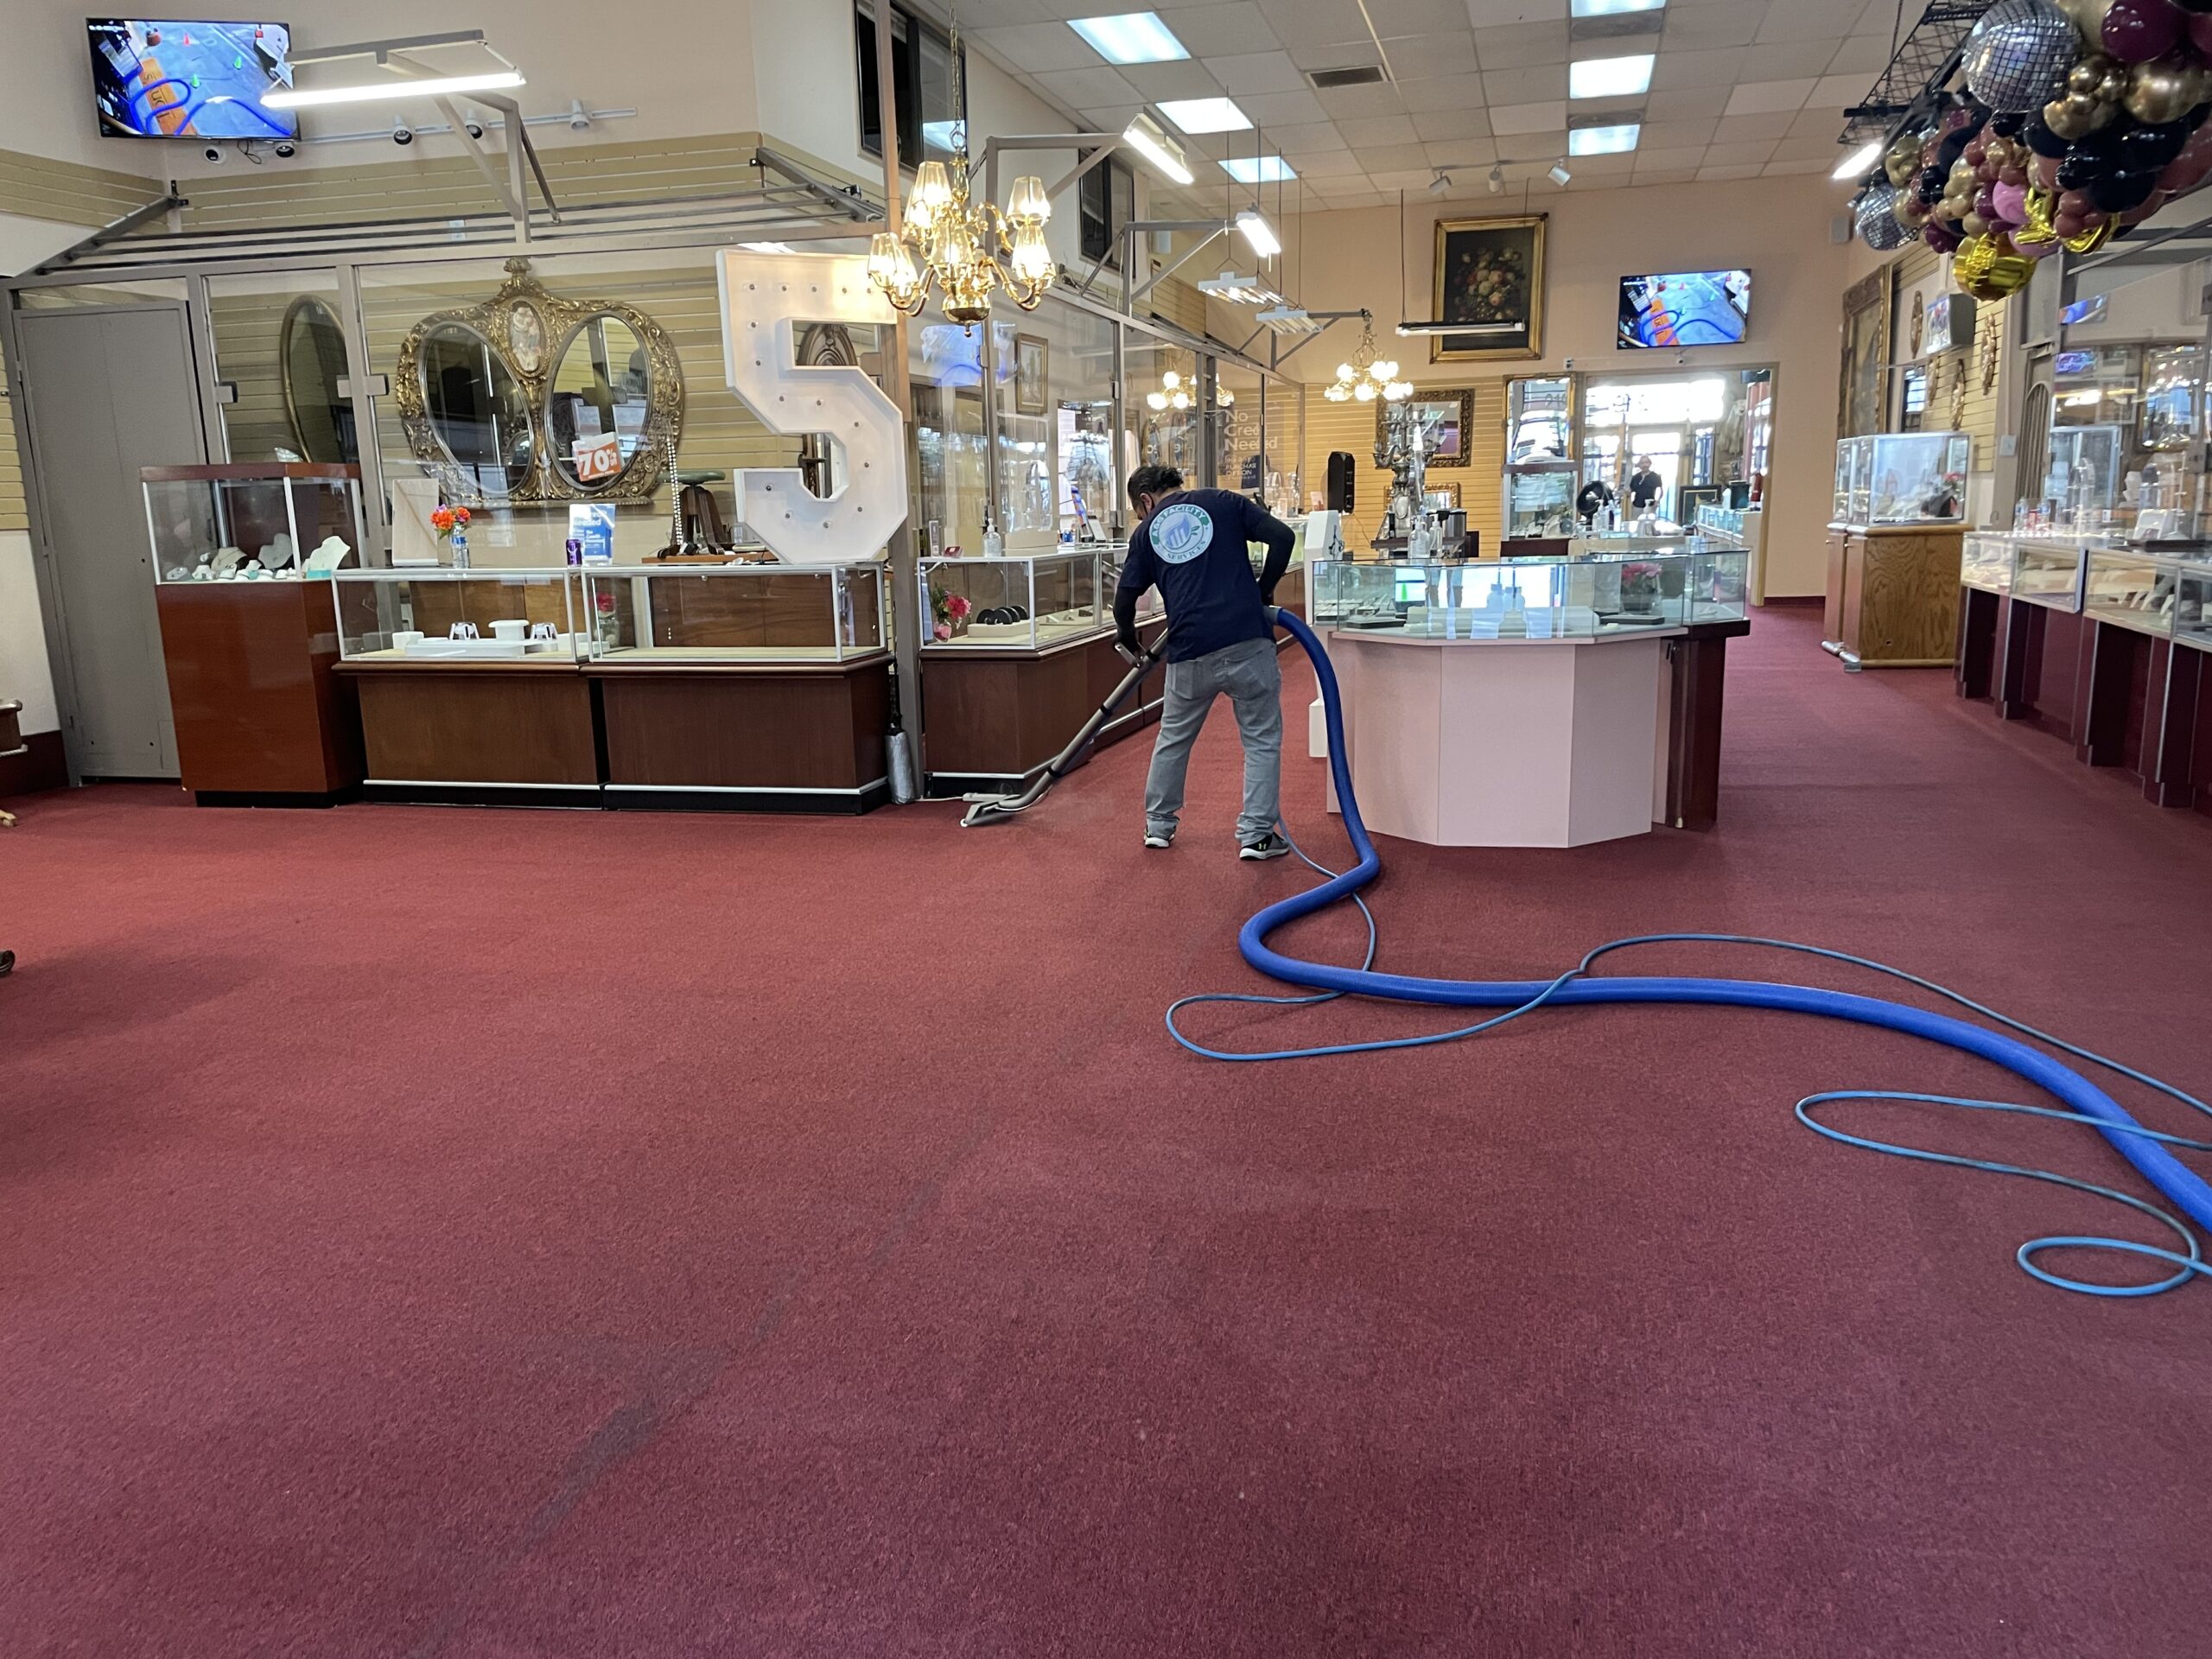 Professional floor care services by A & G Facility Services in Salinas, California